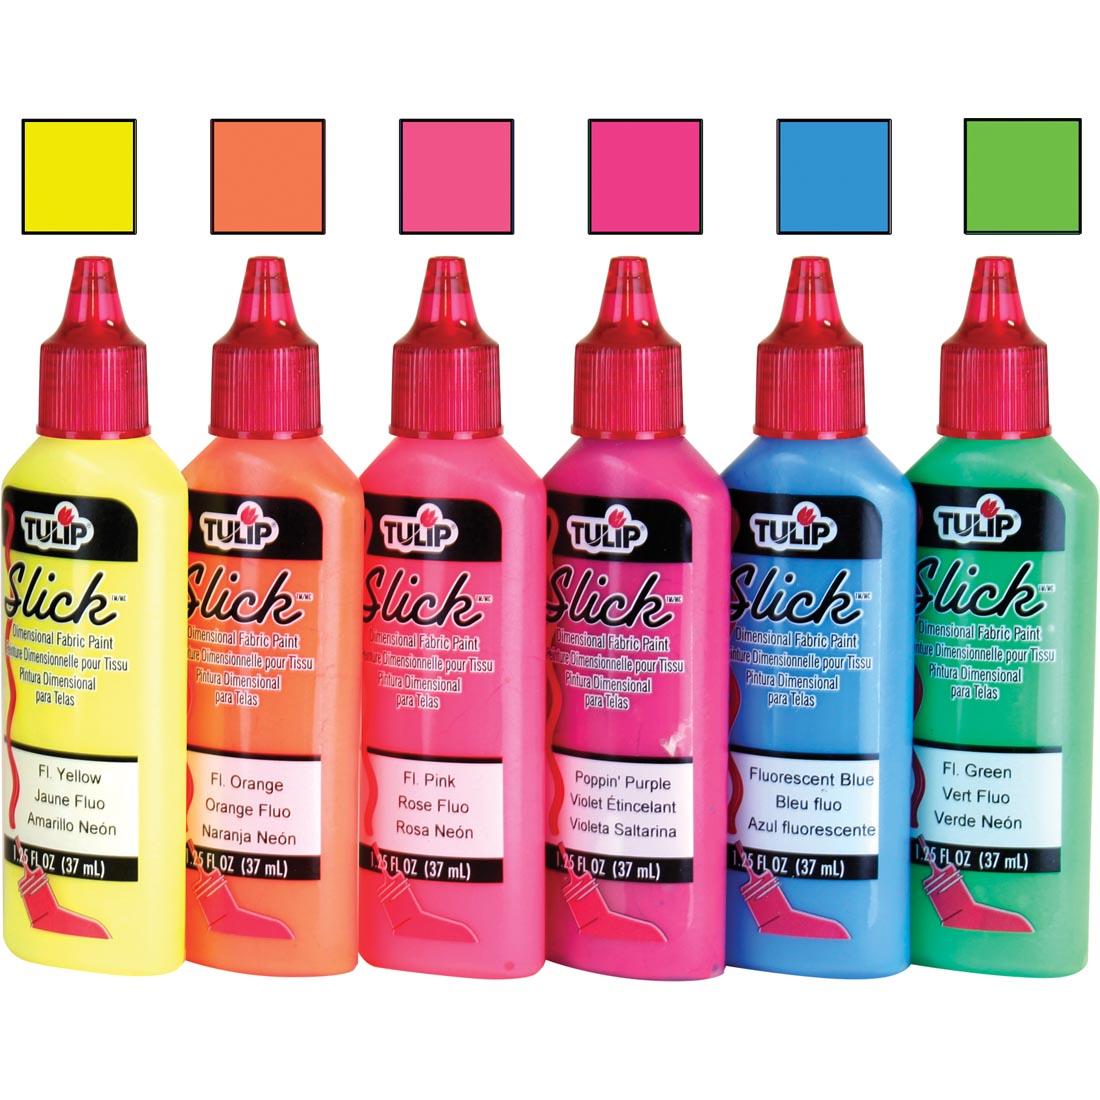 Tulip Slick Dimensional Neon Fabric Paint Bottles with Color Swatches Above